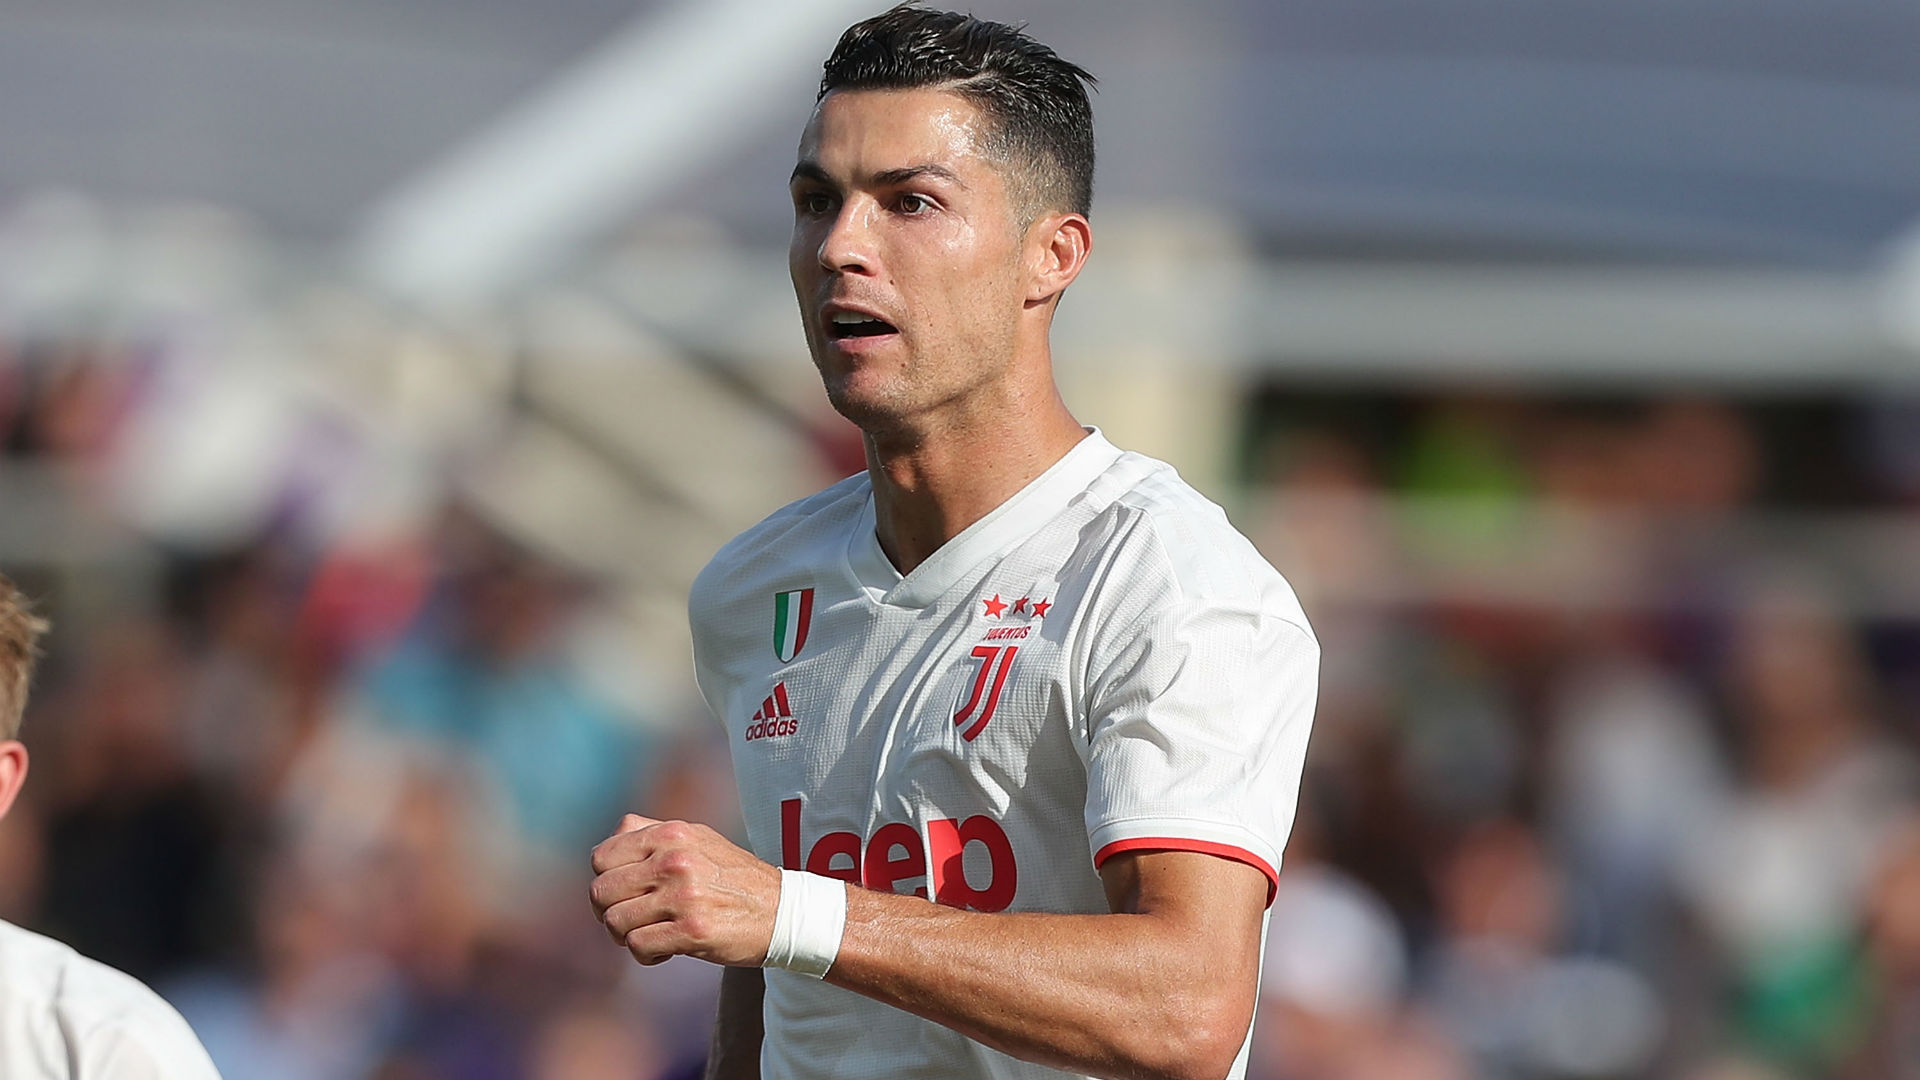 Cristiano Ronaldo will look to continue his tormenting of Atletico Madrid on Wednesday, while Paris Saint-Germain host Real Madrid.